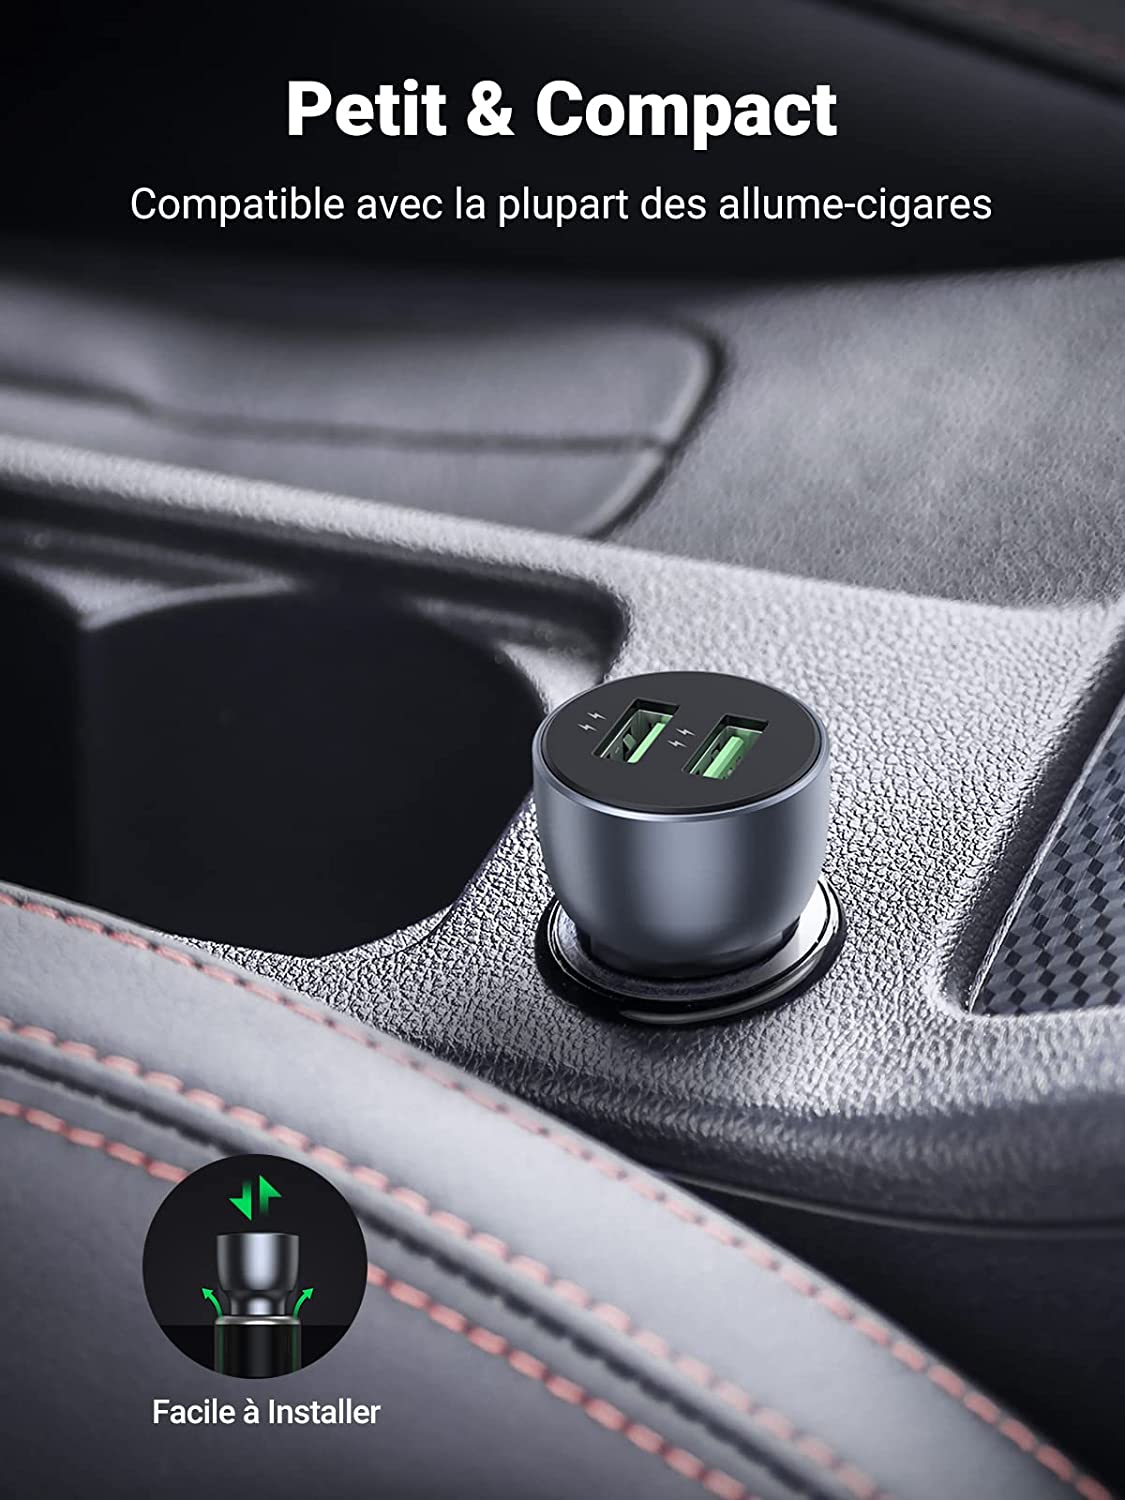 UGREEN Chargeur Voiture Rapide QC 3.0 2 Ports USB 36W Chargeur Allume Cigare Compatible avec iPhone 13 Pro 12 Pro SE 2020 Galaxy S20 S10 Note 10 iPad Air Redmi Note 10 Pro 7